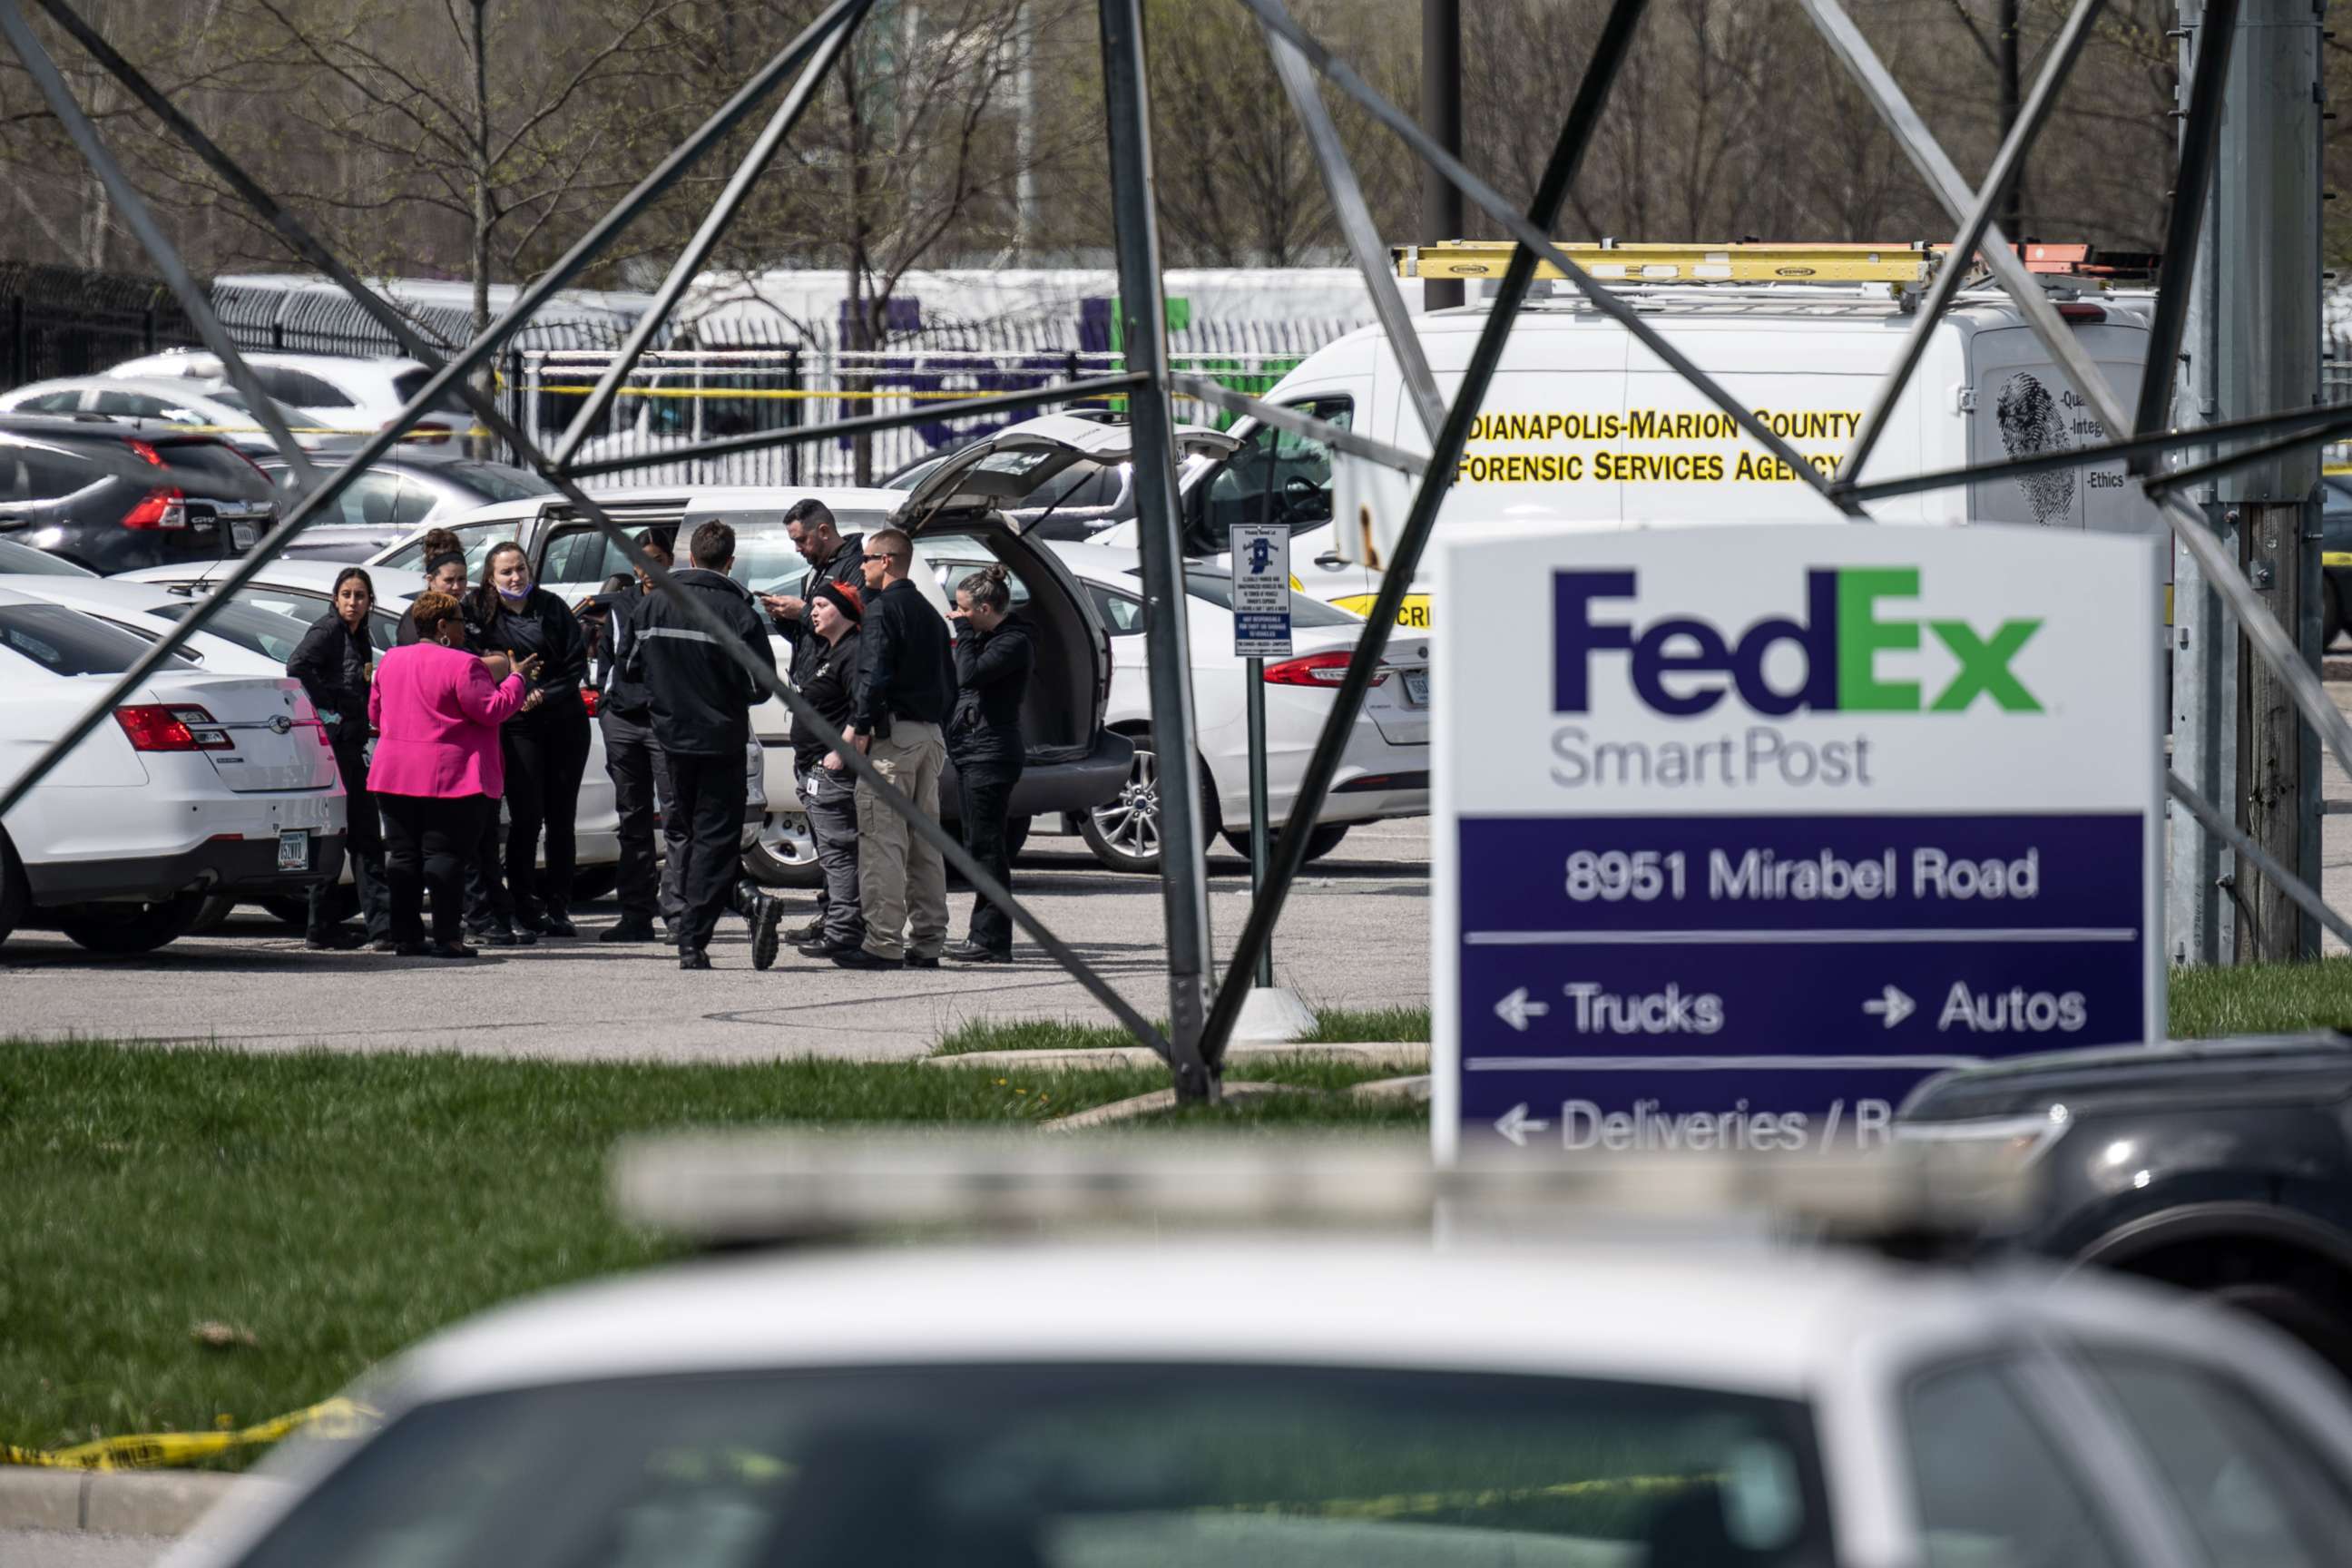 PHOTO: In this April 16, 2021, file photo, a group of crime scene investigators gather to speak in the parking lot of a FedEx SmartPost in Indianapolis.